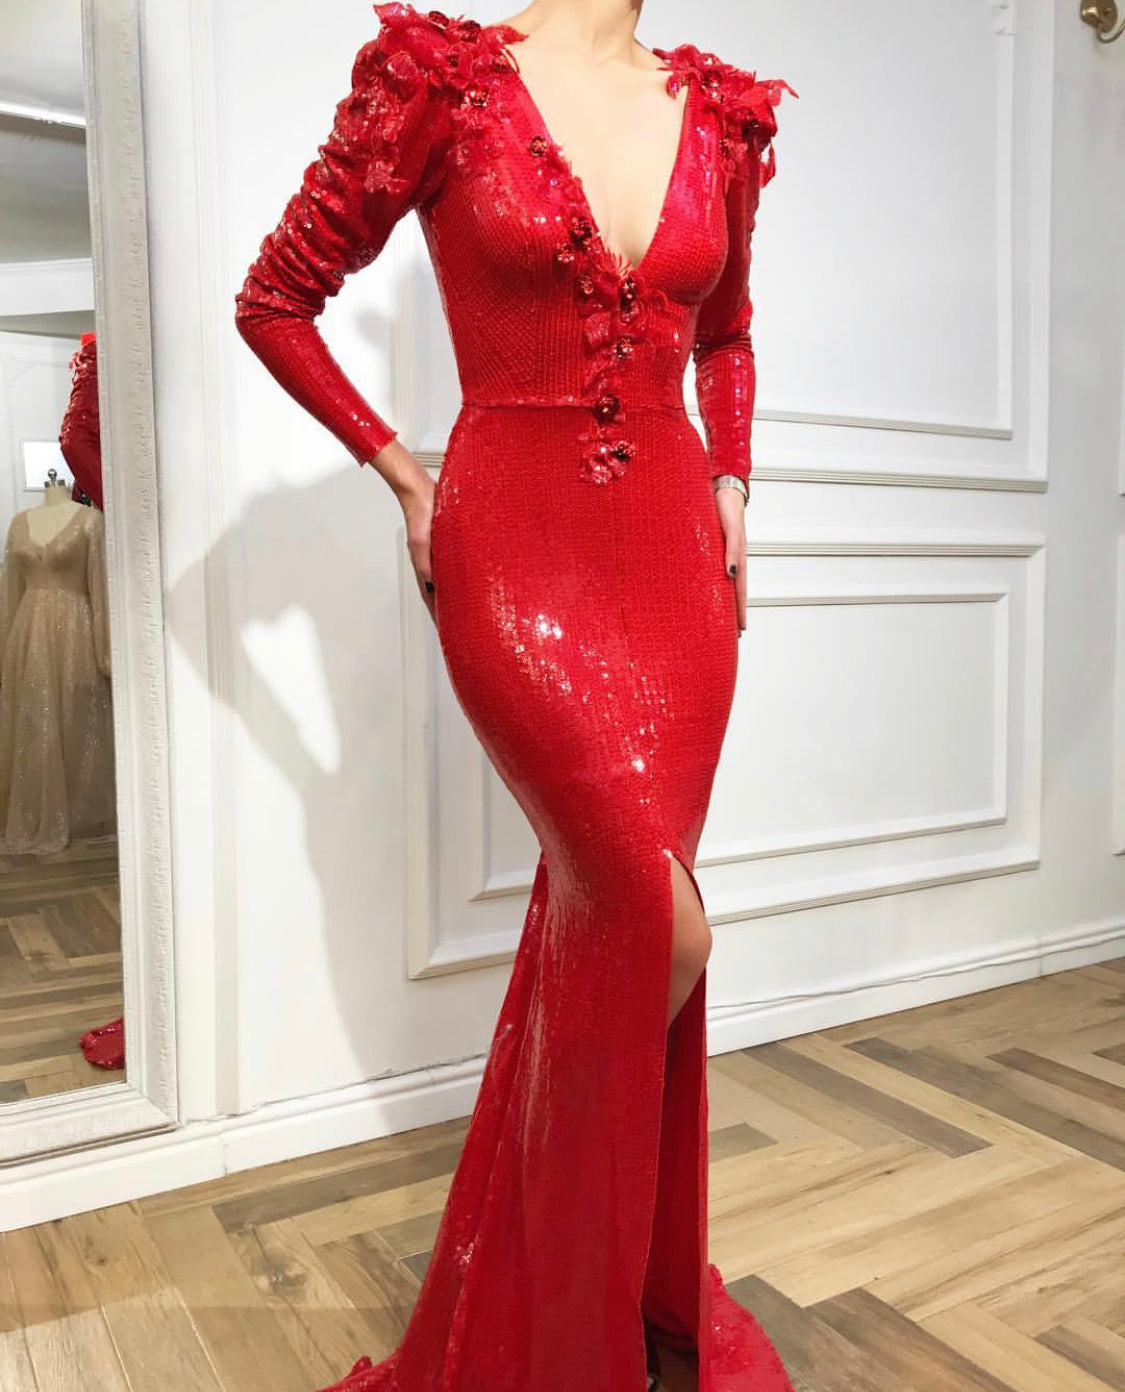 Red mermaid dress with long sleeves, sequins, v-neck and embroidery